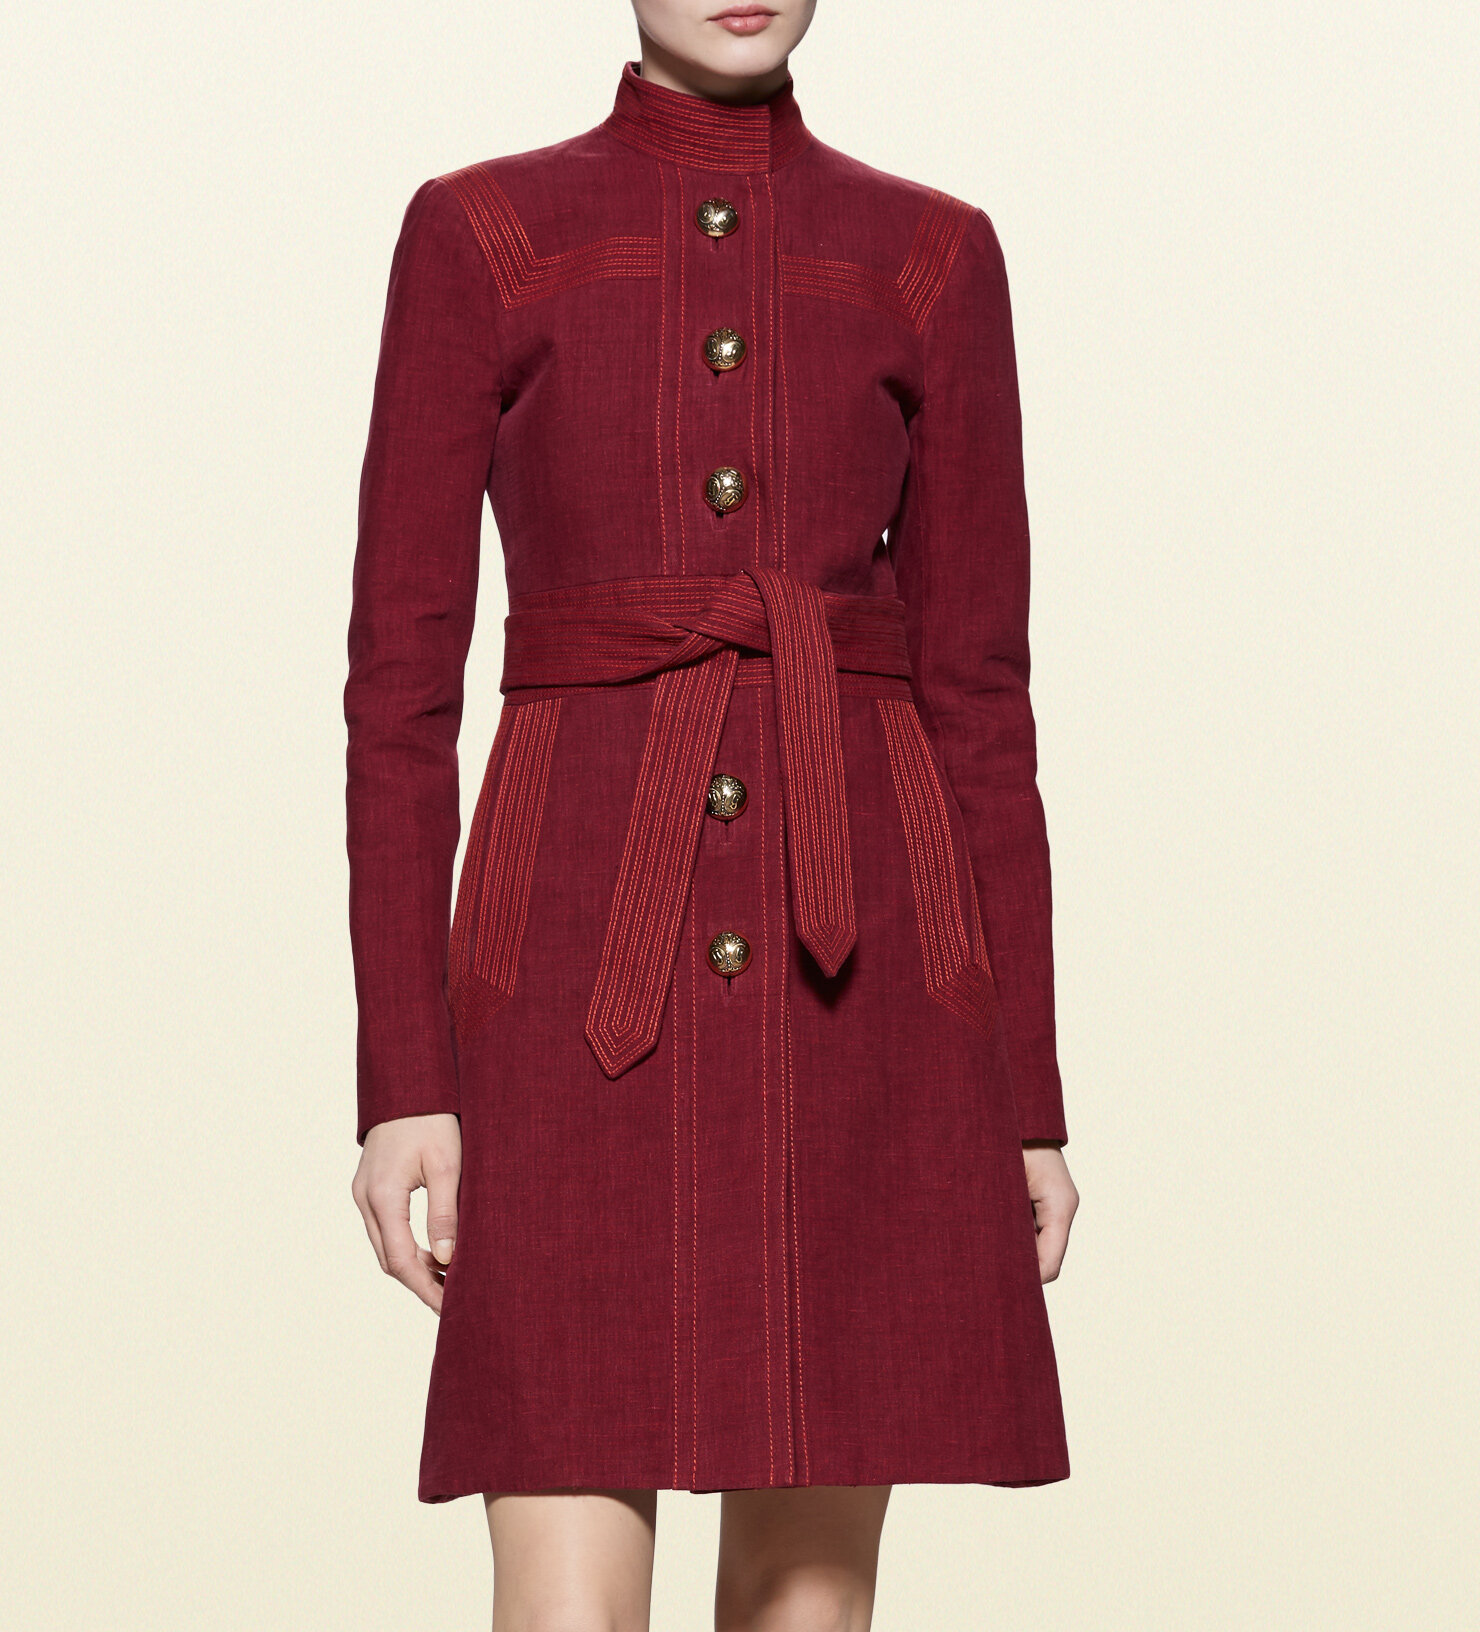 Gucci Bonded Linen Multi-stich Trench Coat in Red.jpg